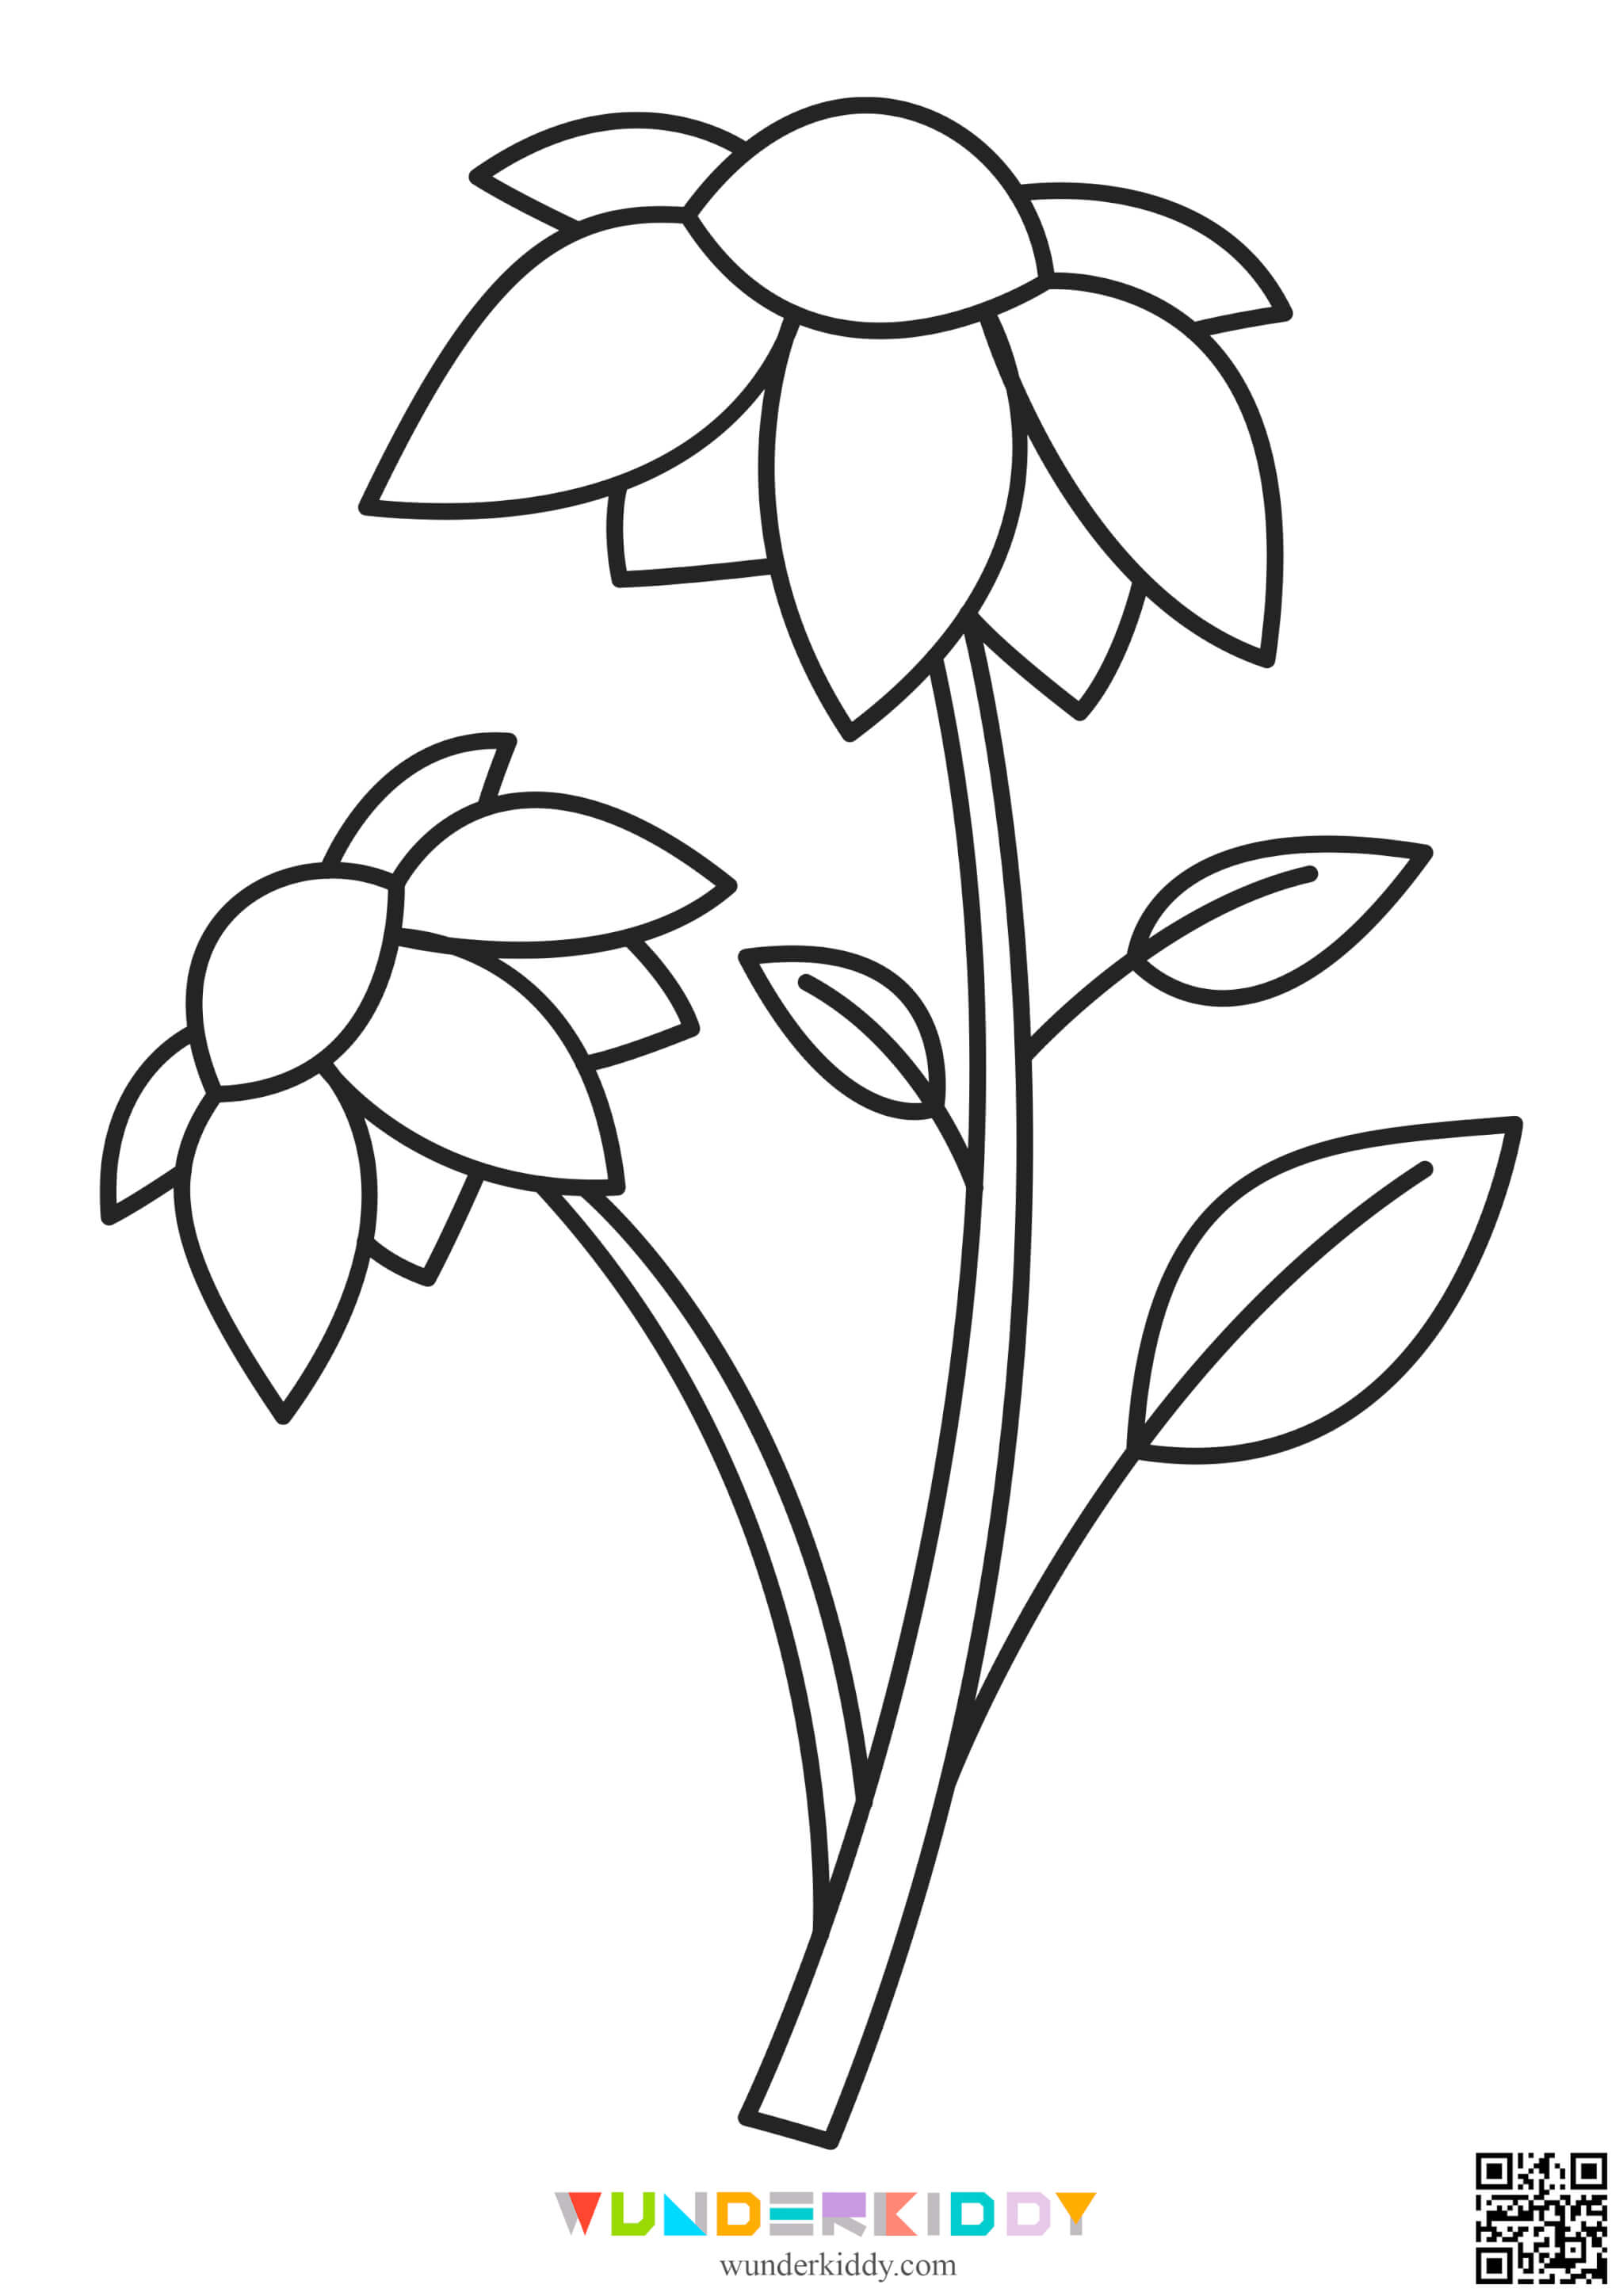 Flower Printable Coloring Pages - Image 21